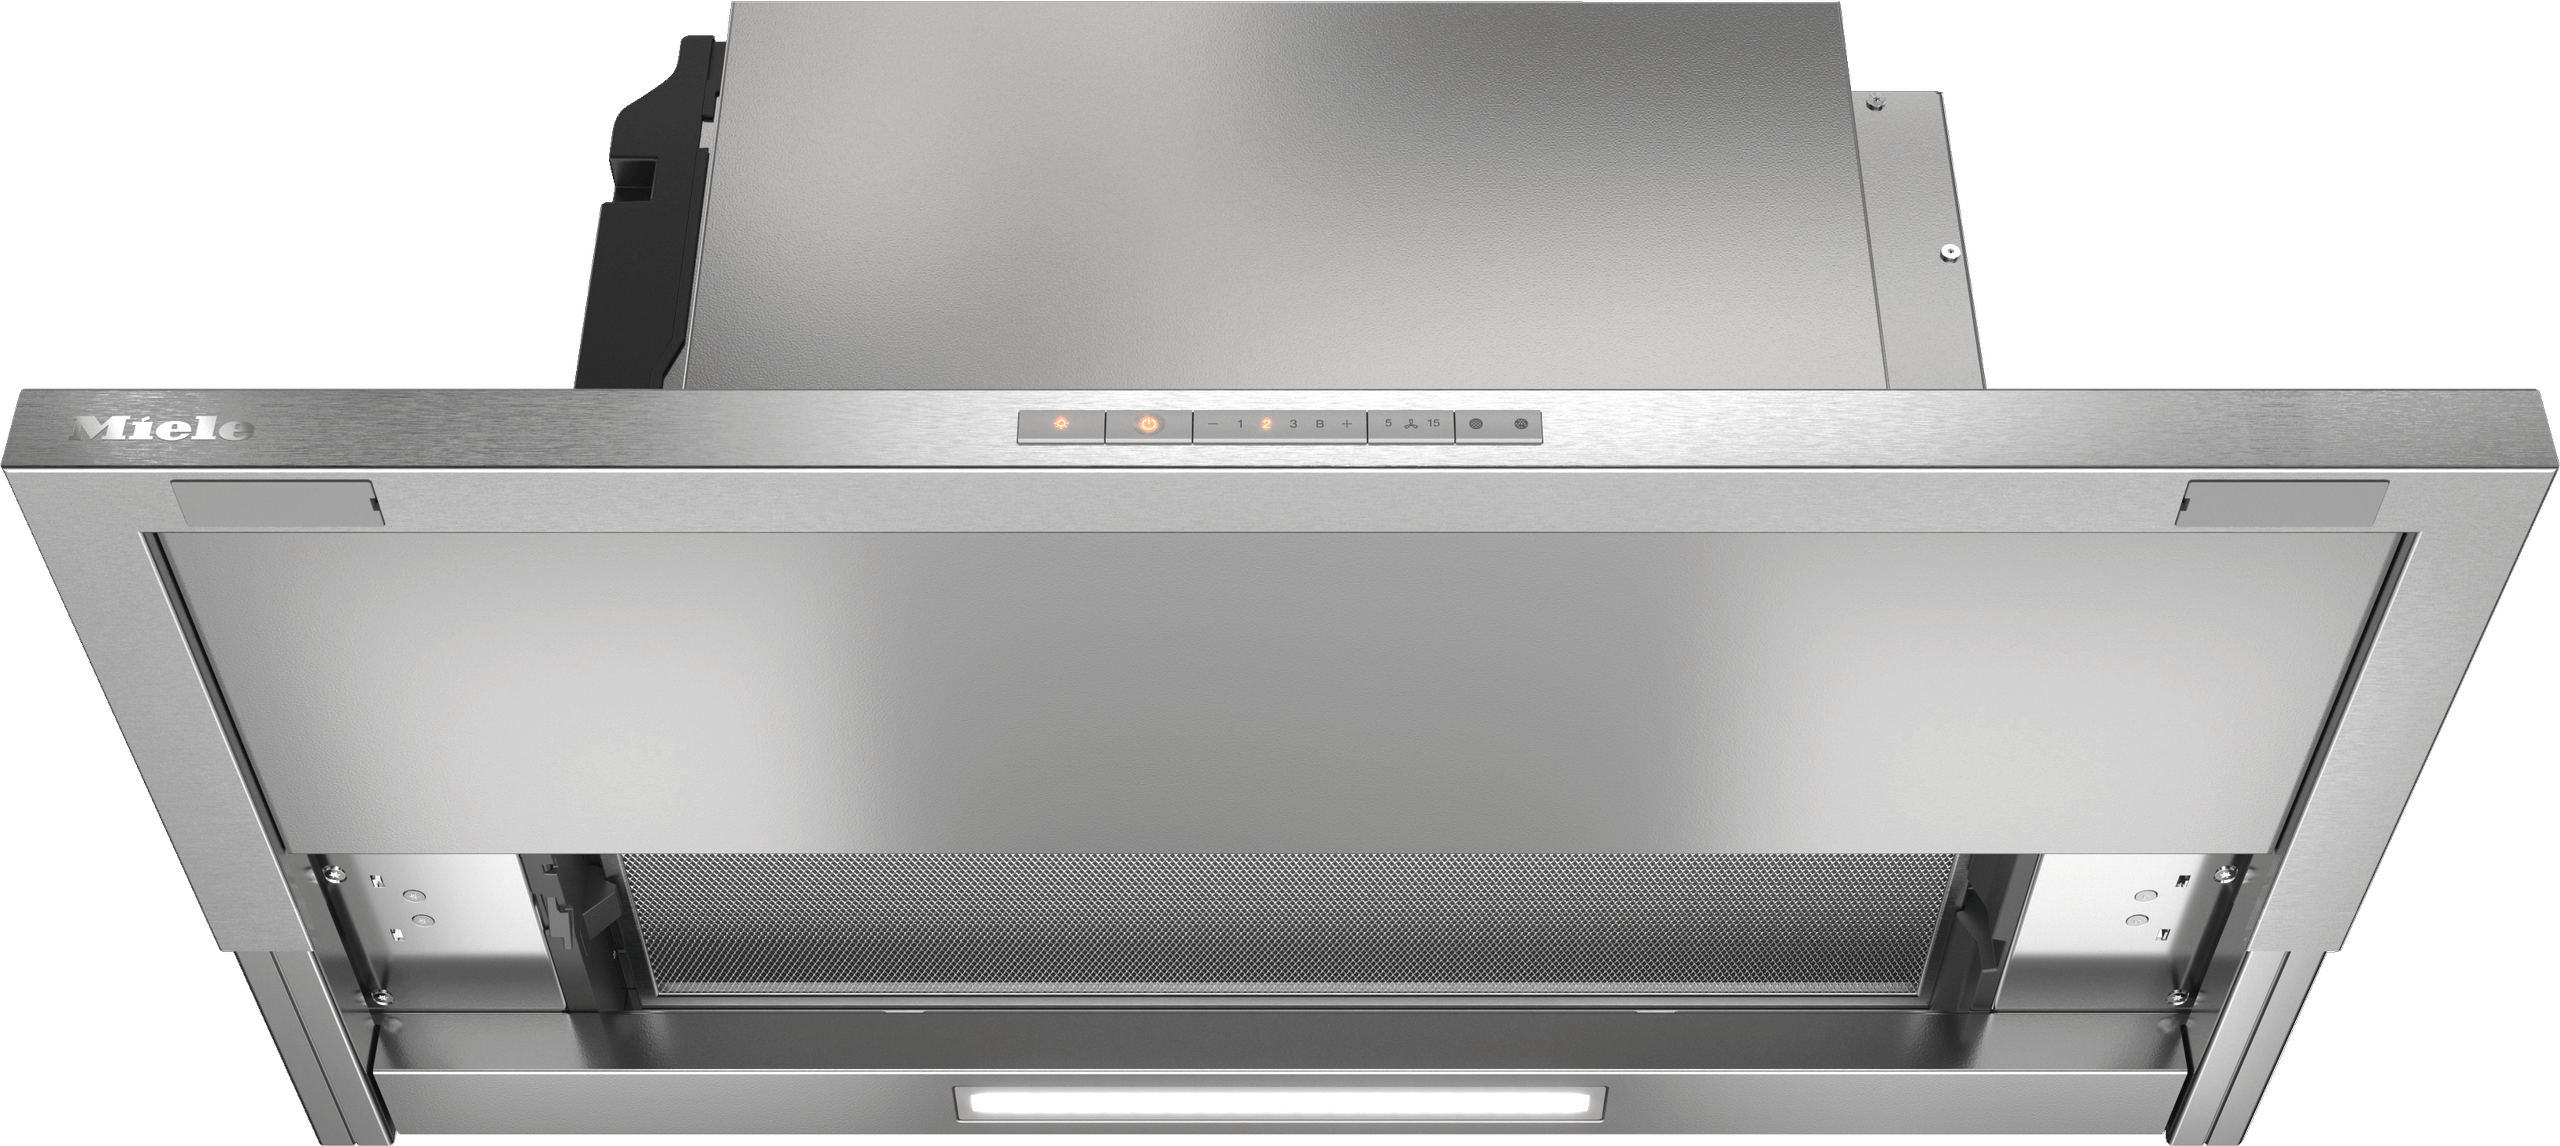 Miele DAS4720STAINLESSSTEEL Das 4720 - Built-In Ventilation Hood For Installation In Narrow Upper Cabinets With Easyswitch Controls